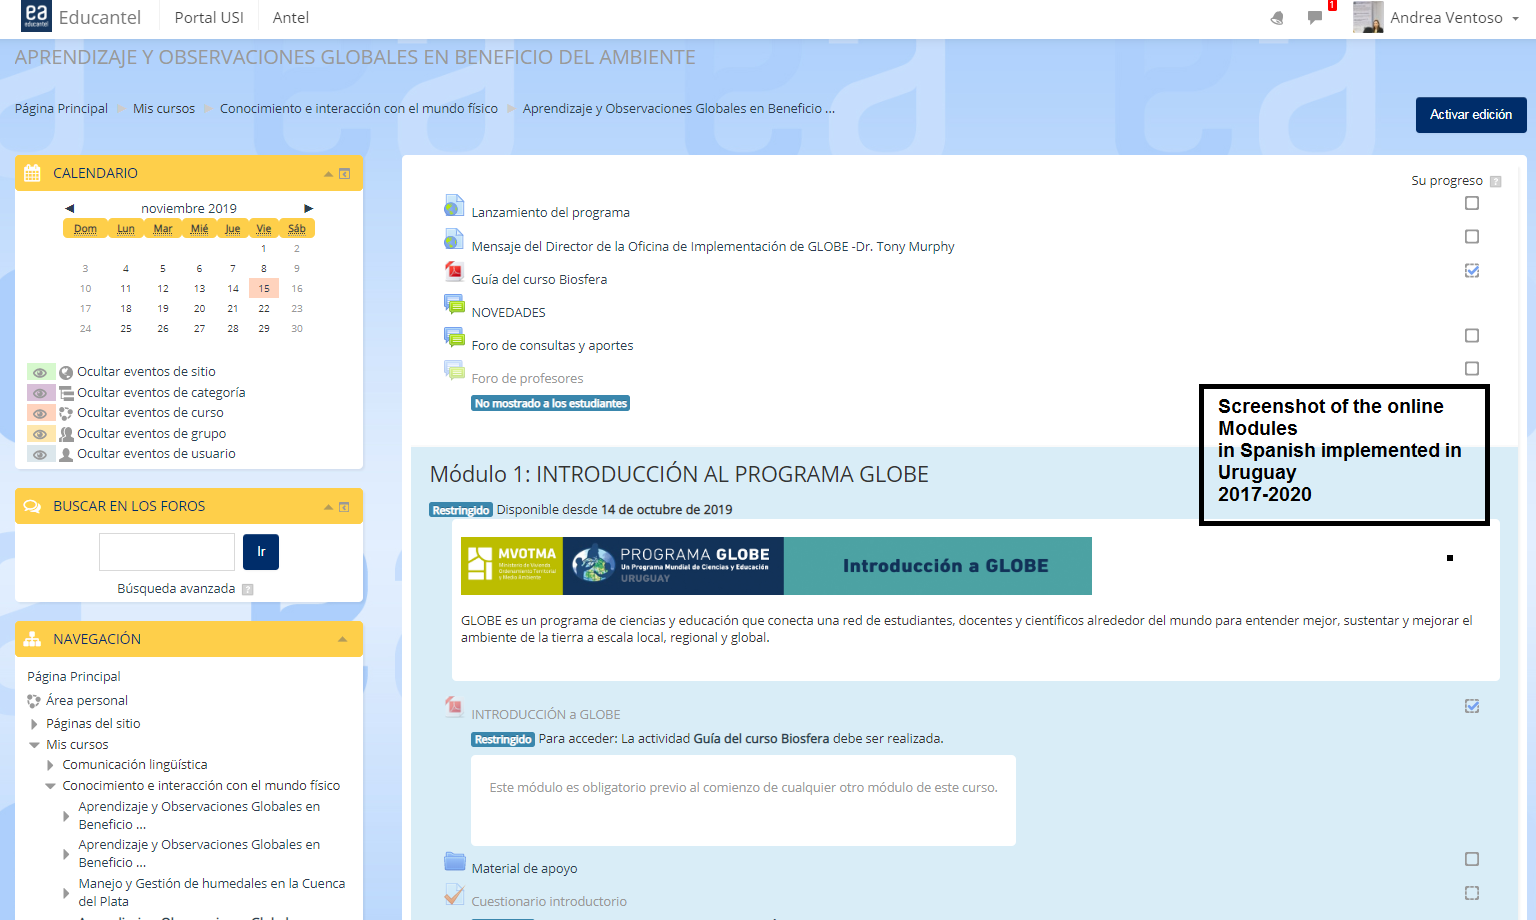 Screenshot of the online modules in Spanish, implemented in Uruguay, 2017-2020.